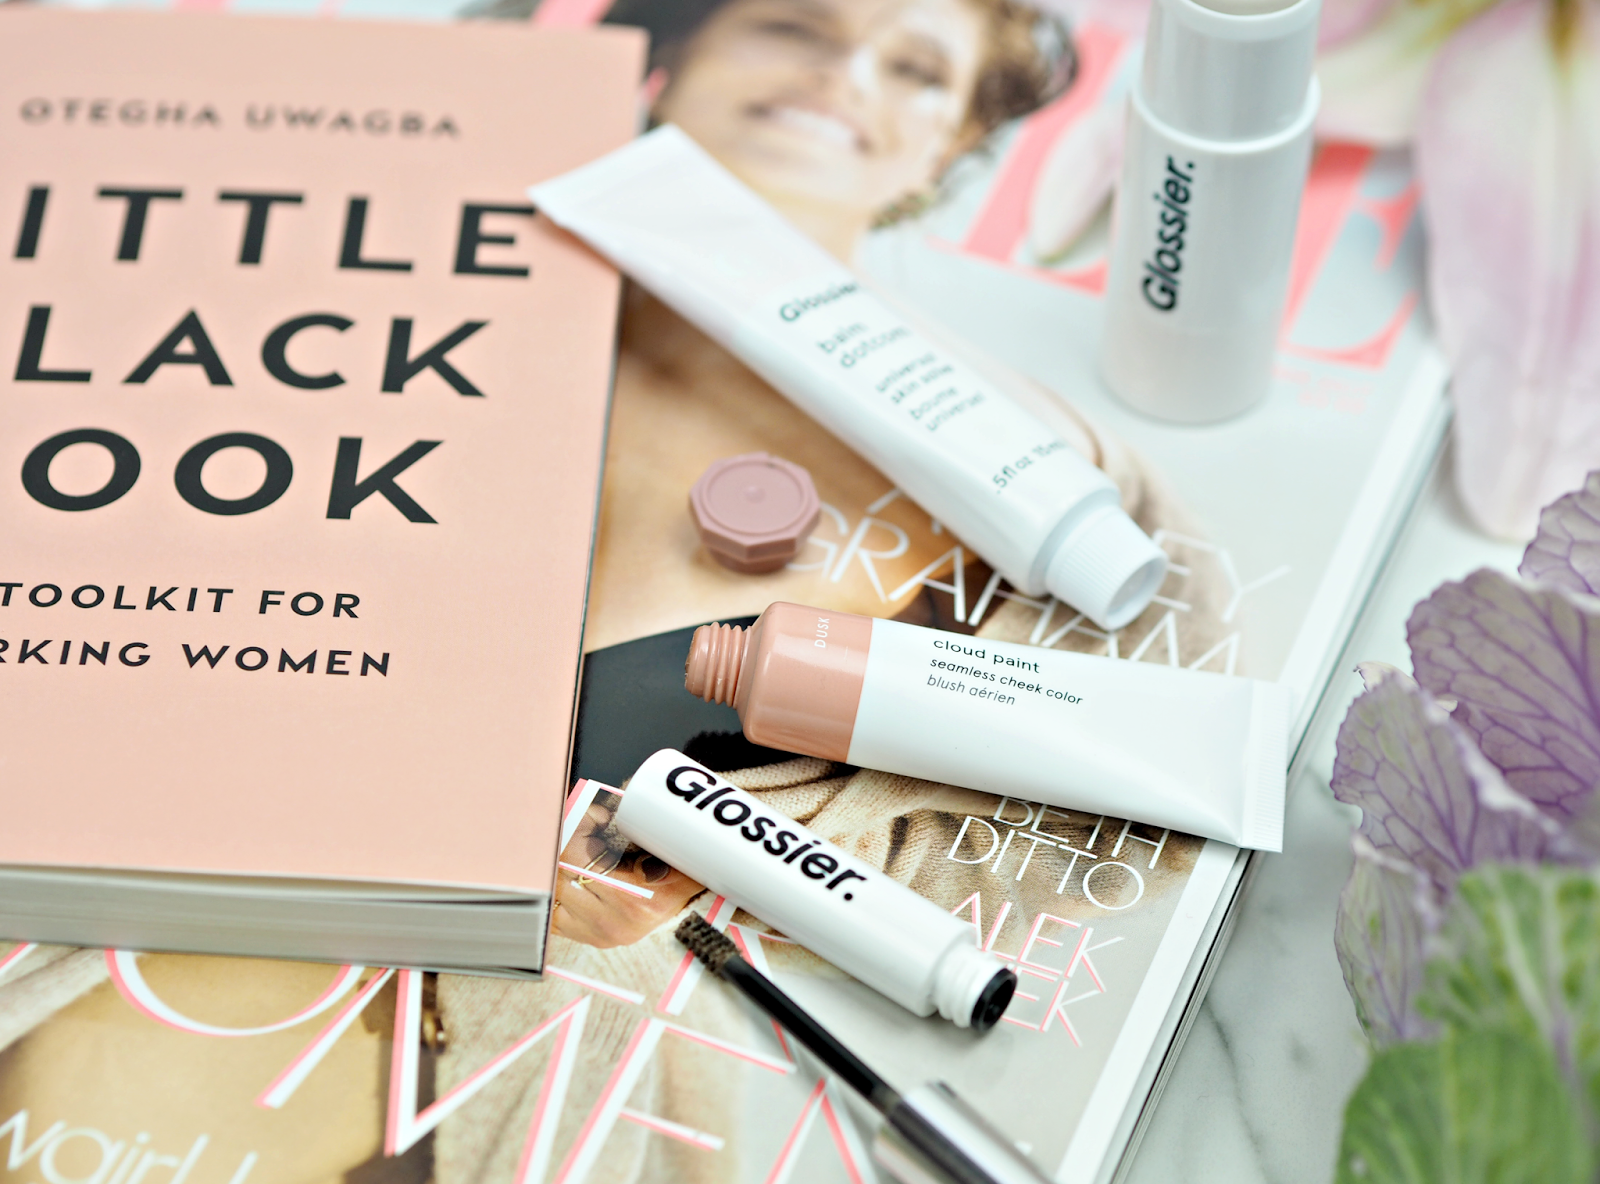 Anatomy Of A Beauty Frenzy: How Glossier Caused Hysteria Around Their Launch (And Some Bits Worth Trying)